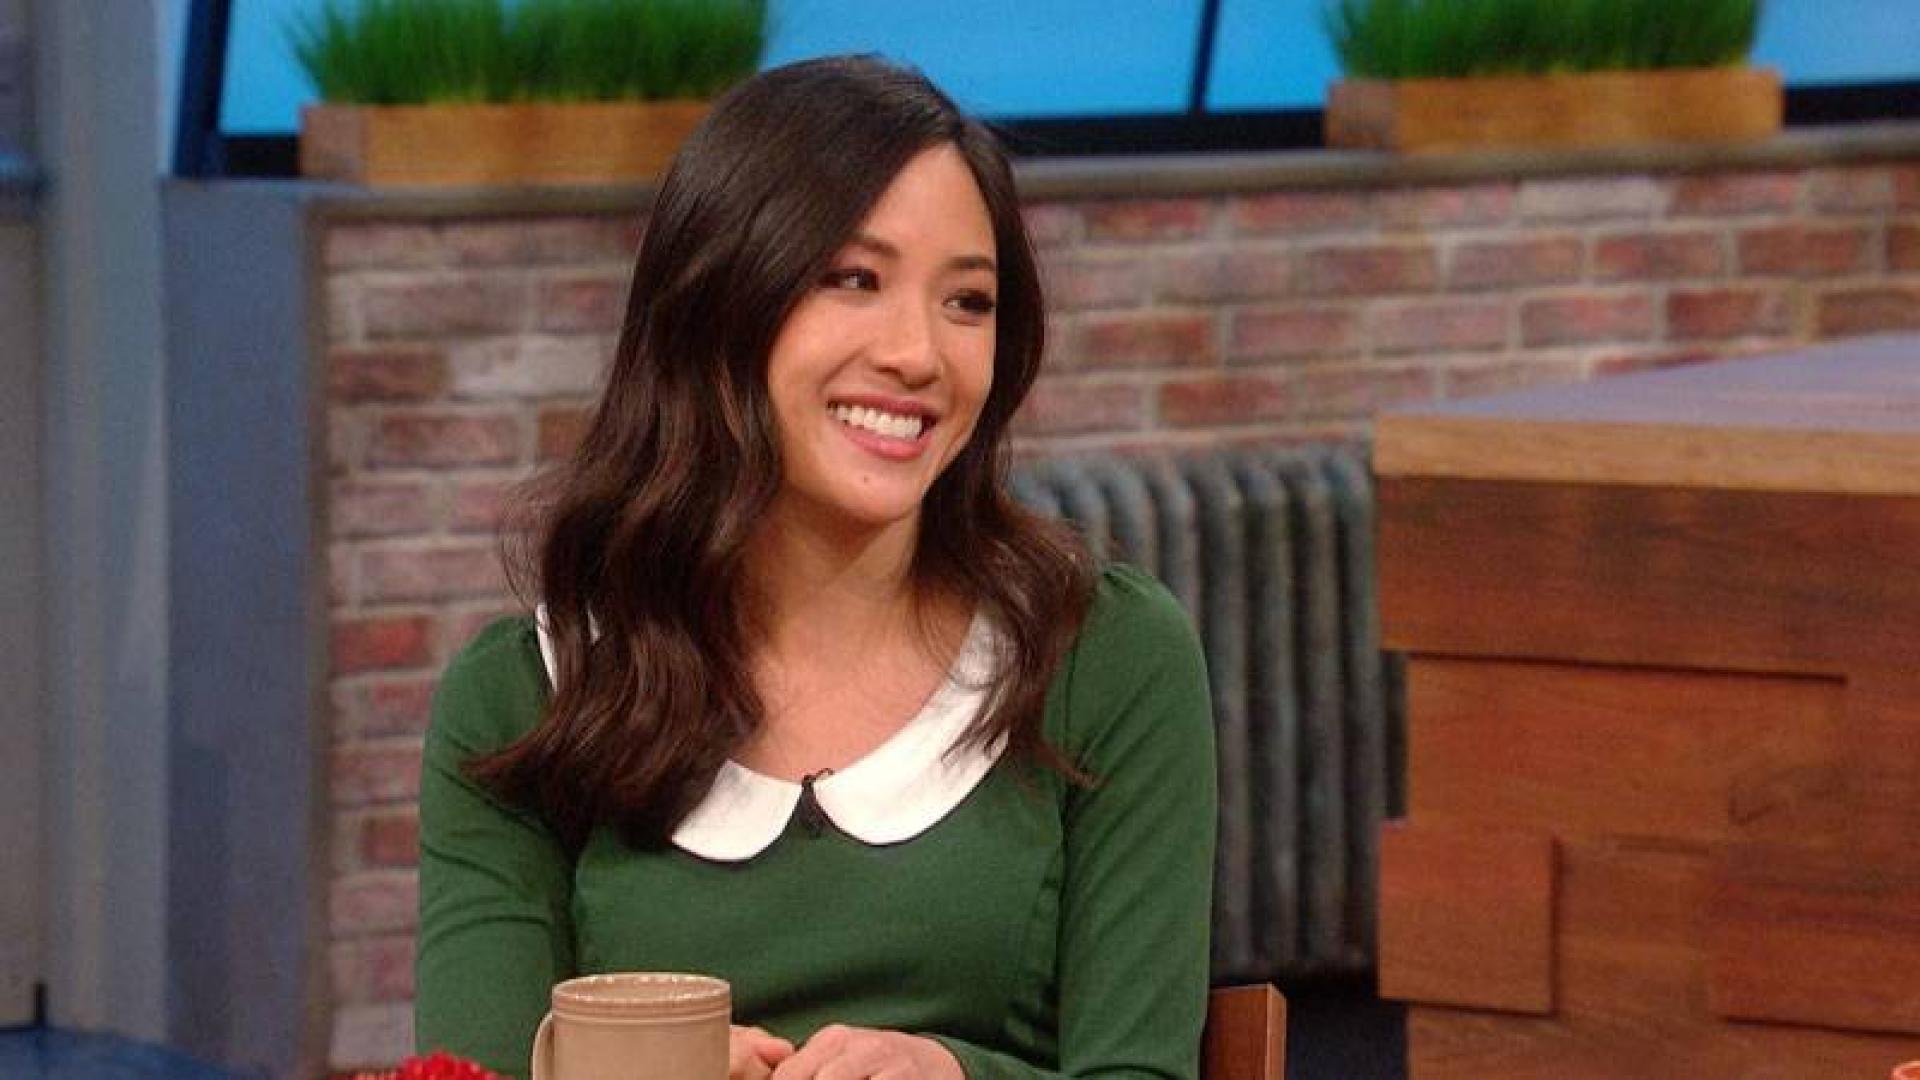 Fresh Off the Boat' Star Constance Wu's Hilarious Encounter With a